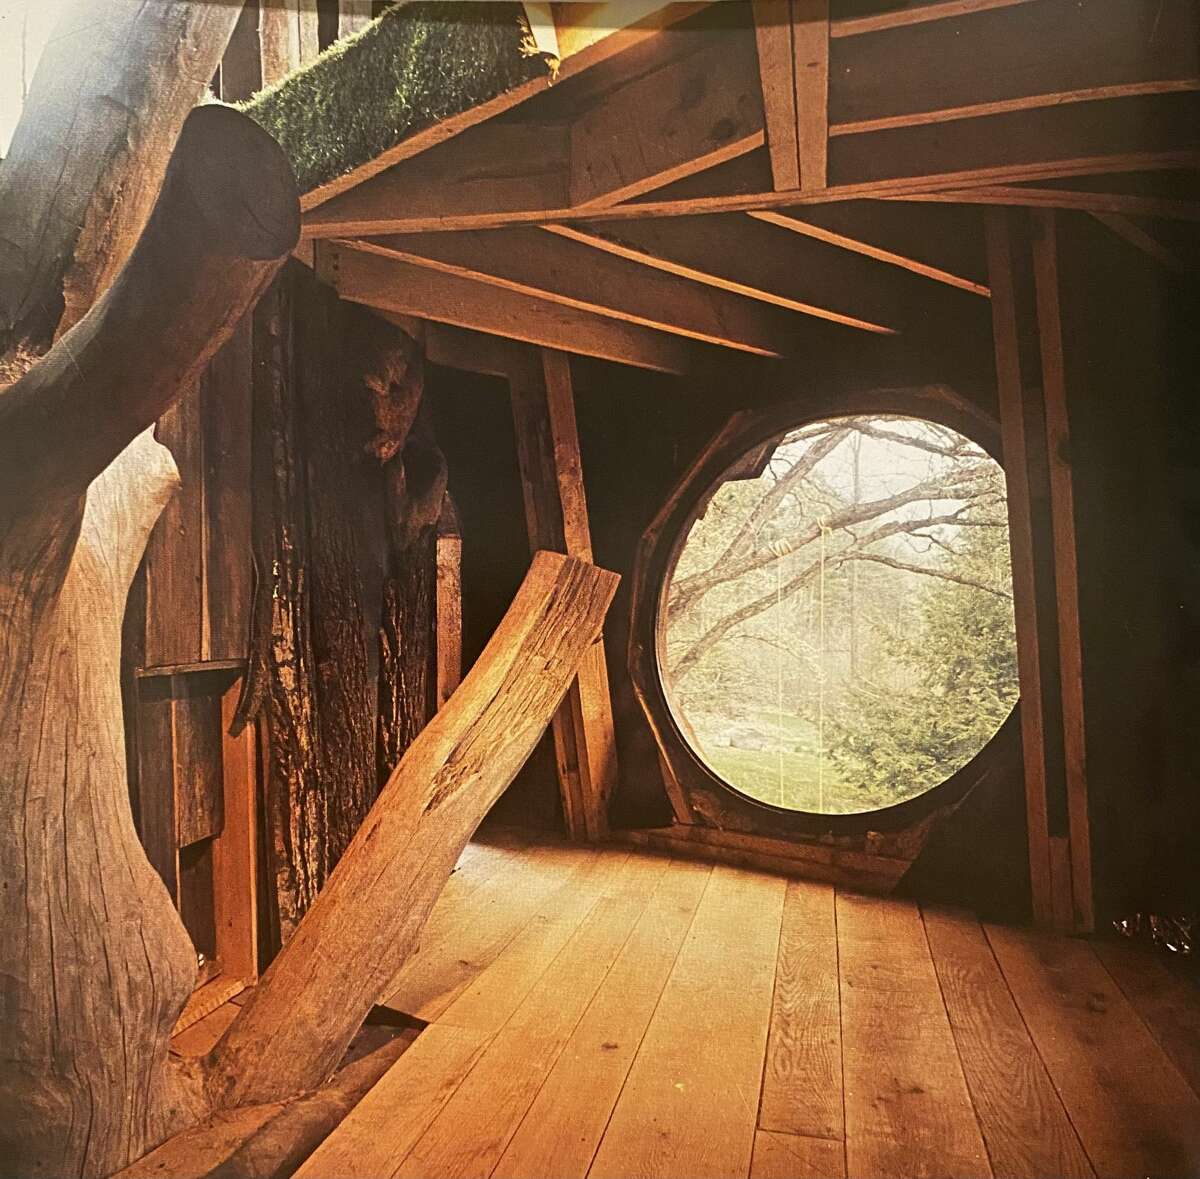 This handmade house was built around an old oak tree. Each home, reads the introduction of 'Woodstock Handmade Houses,' “was once a dream, a dream realized by imagination, hard work and the urge to build free and personally.”